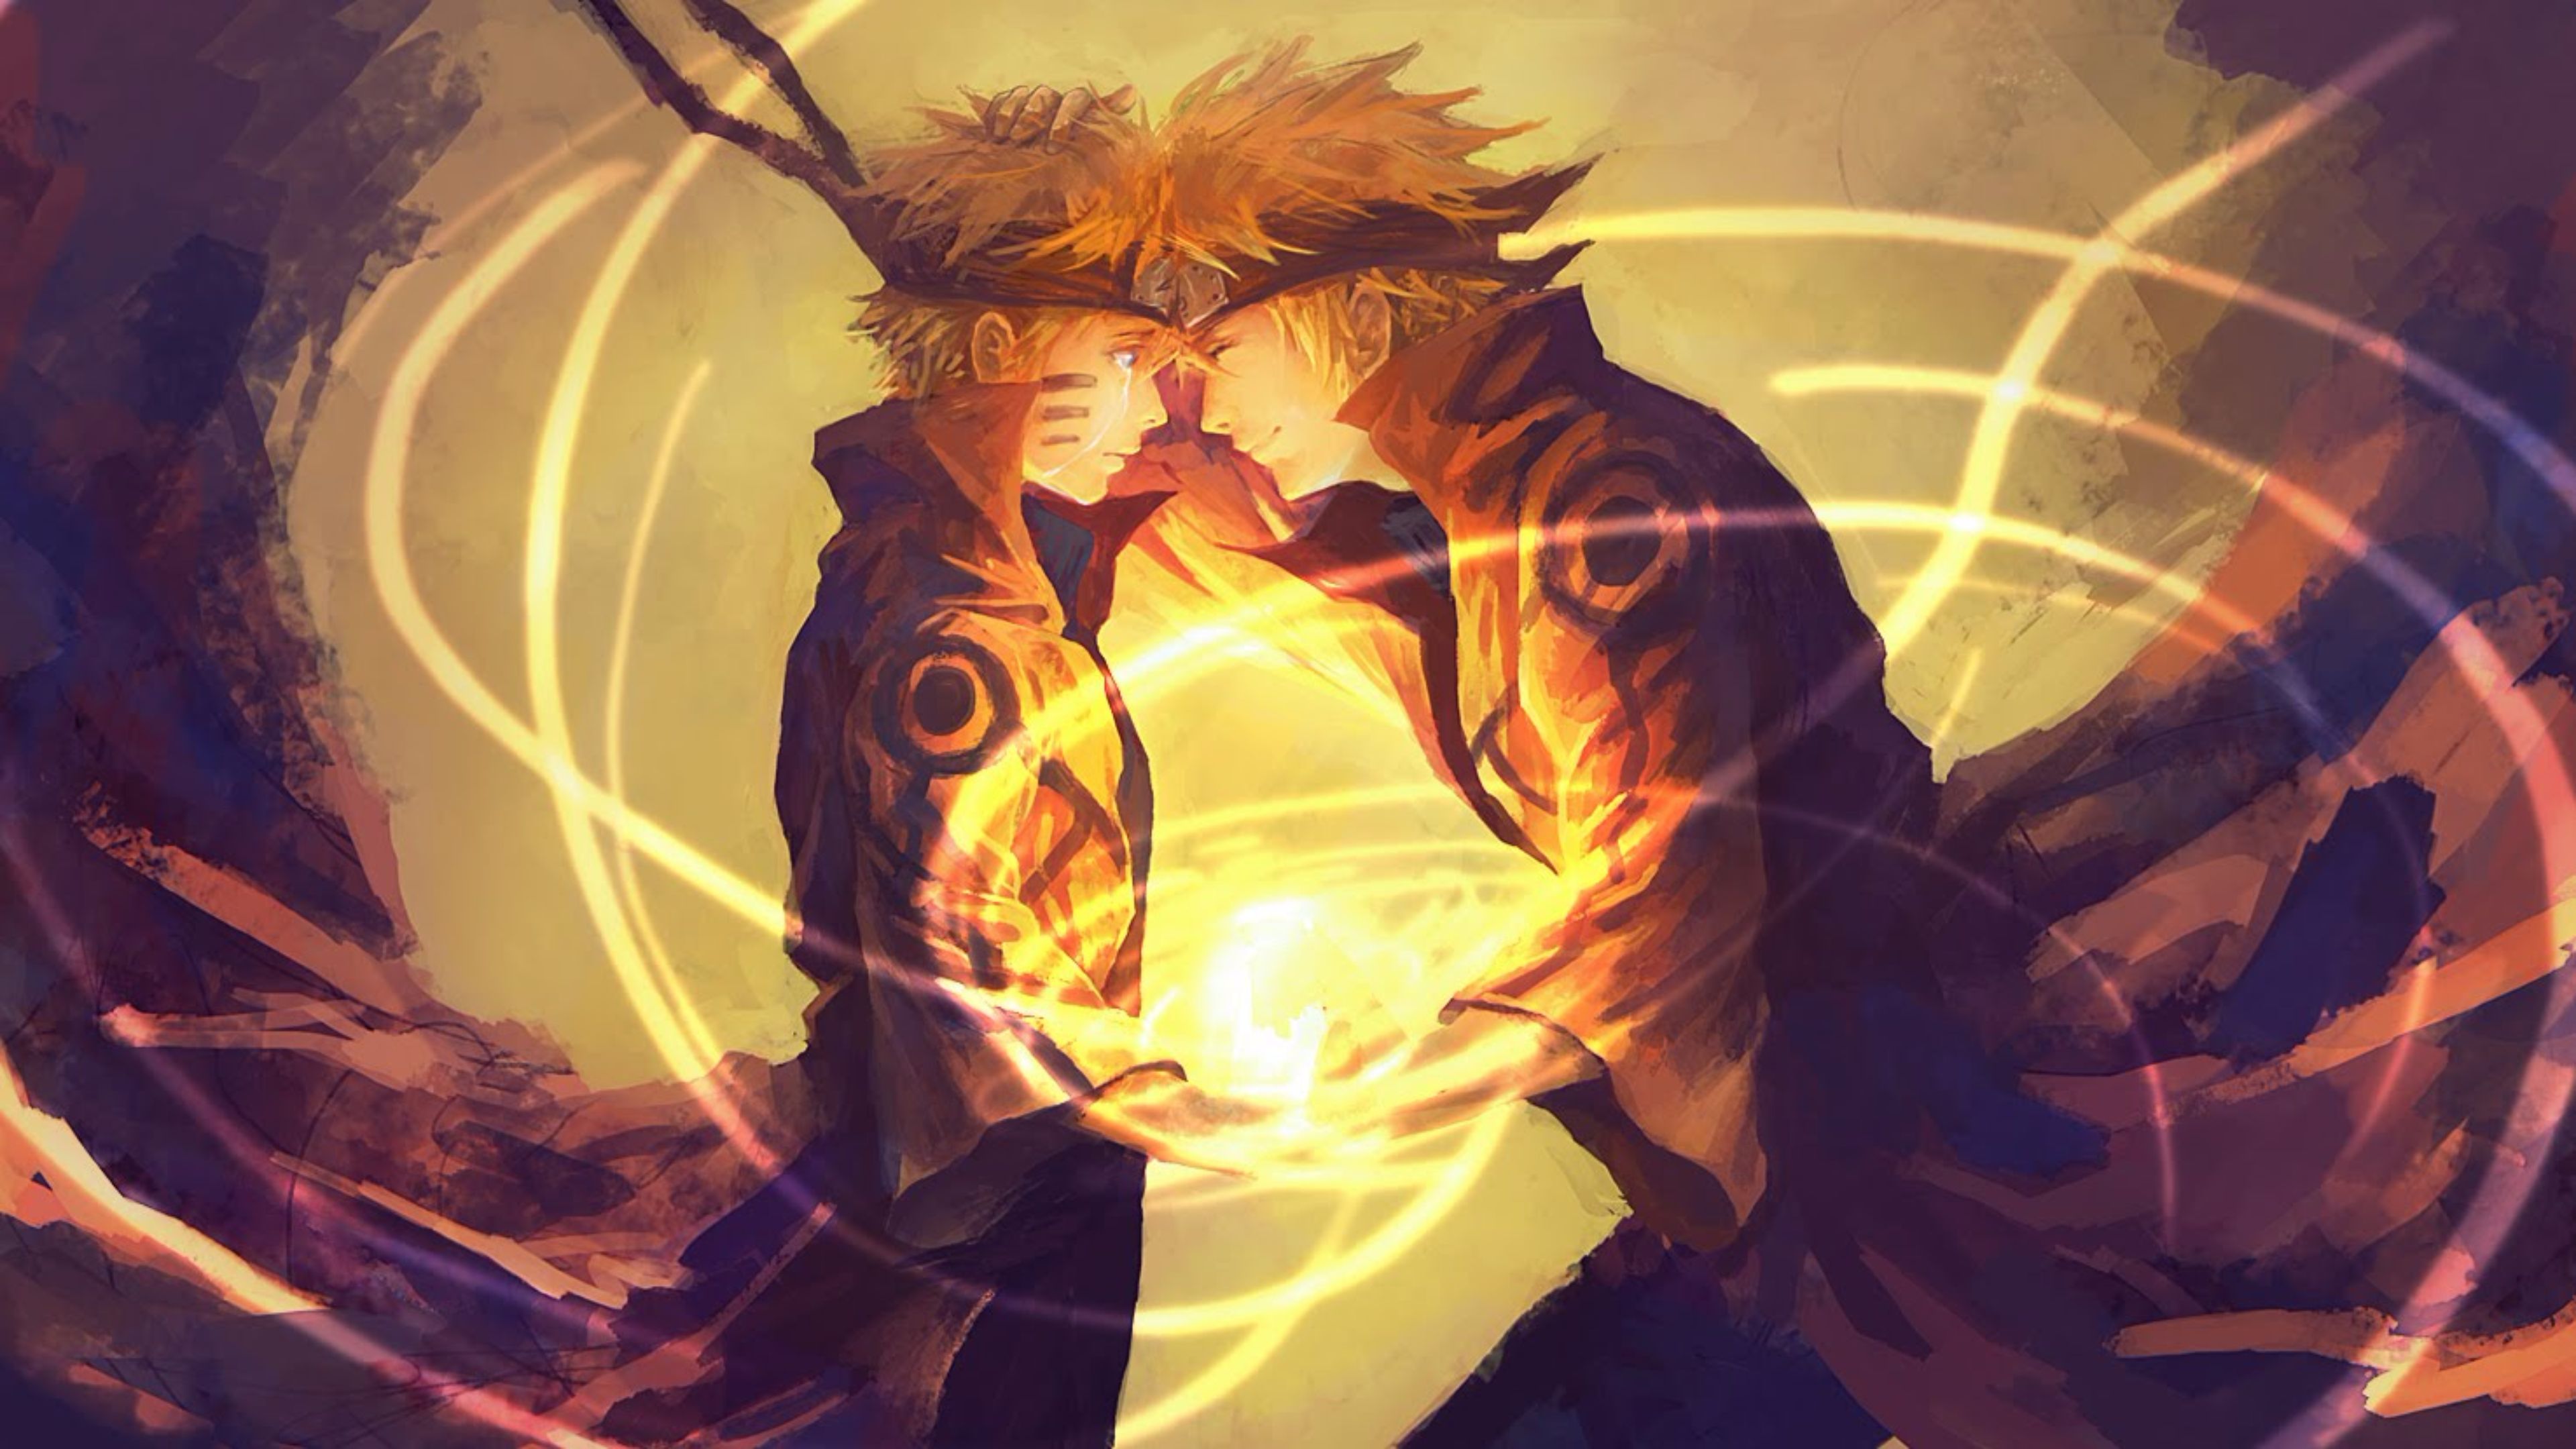 Naruto» 1080P, 2k, 4k HD wallpapers, backgrounds free download | Rare  Gallery